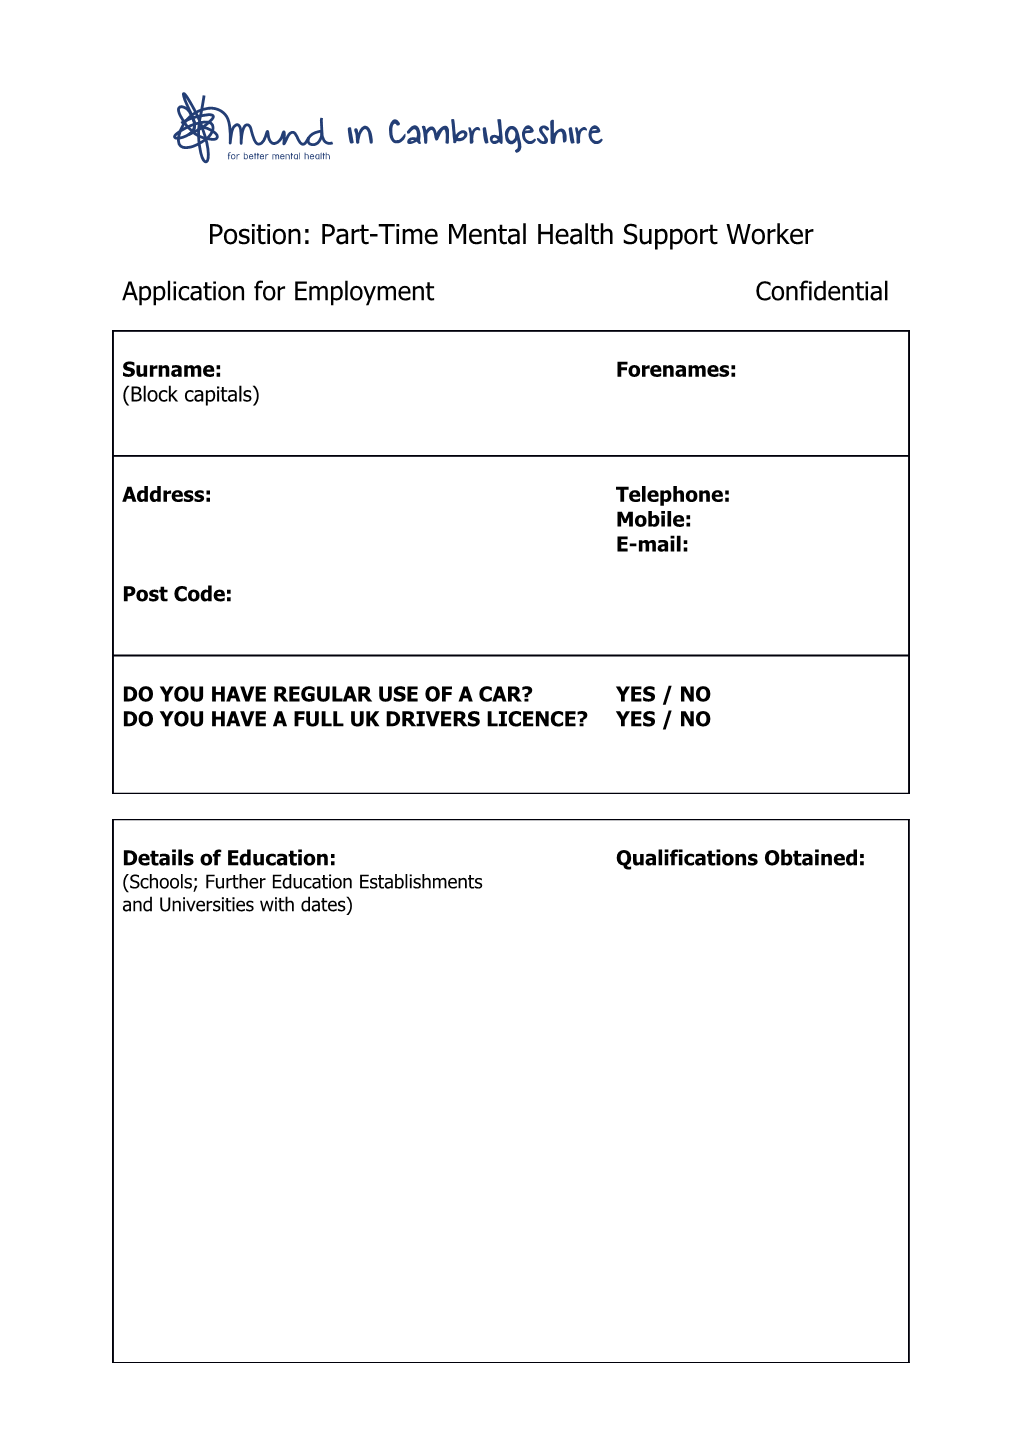 Position: Part-Time Mental Health Support Worker